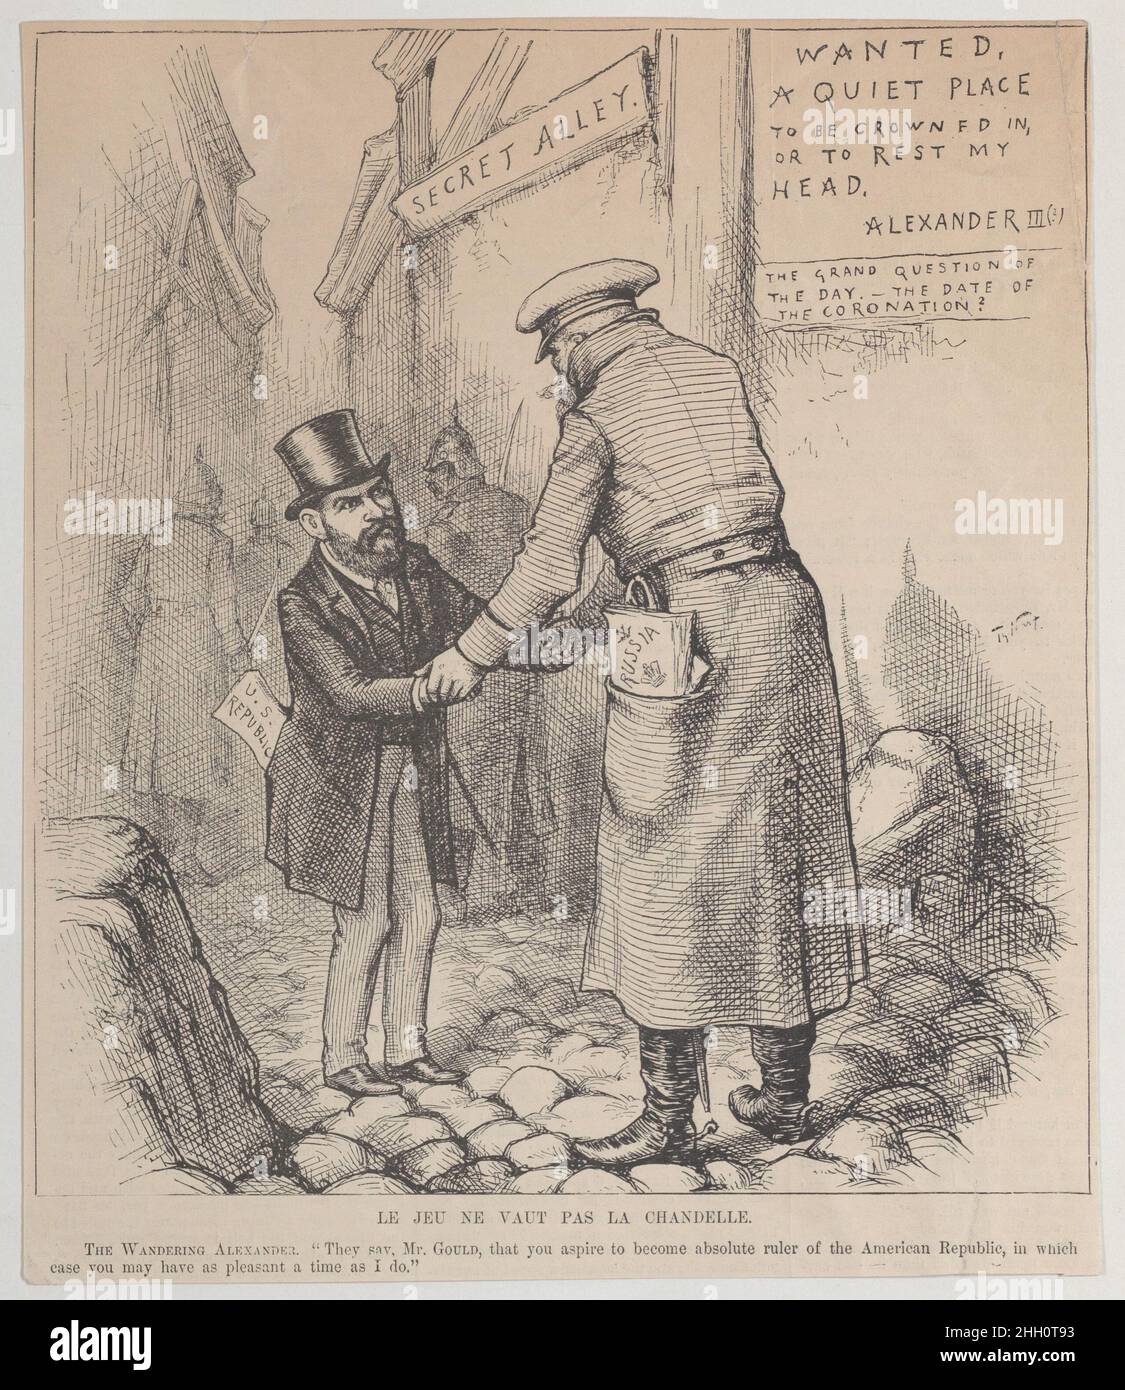 Le Jeu Ne Vaut Pas La Chandelle (The Game is Not Worth a Candle) 1881–83 Thomas Nast The American robber baron Jay Gould (1832–1896) shakes hands wih the Russian Tsar Alexander in a secret alley. Text at right on a wall reads: 'Wanted, a quiet place to be crowned in, or to rest my head. / Alexander III(?) / The grand question of the day.–The date of the coronation?' Alexander's father was assassinated in March 1881 but he was not crowed until May 1883.. Le Jeu Ne Vaut Pas La Chandelle (The Game is Not Worth a Candle). Thomas Nast (American (born Germany), Landau 1840–1902 Guayaquil). 1881–83. Stock Photo